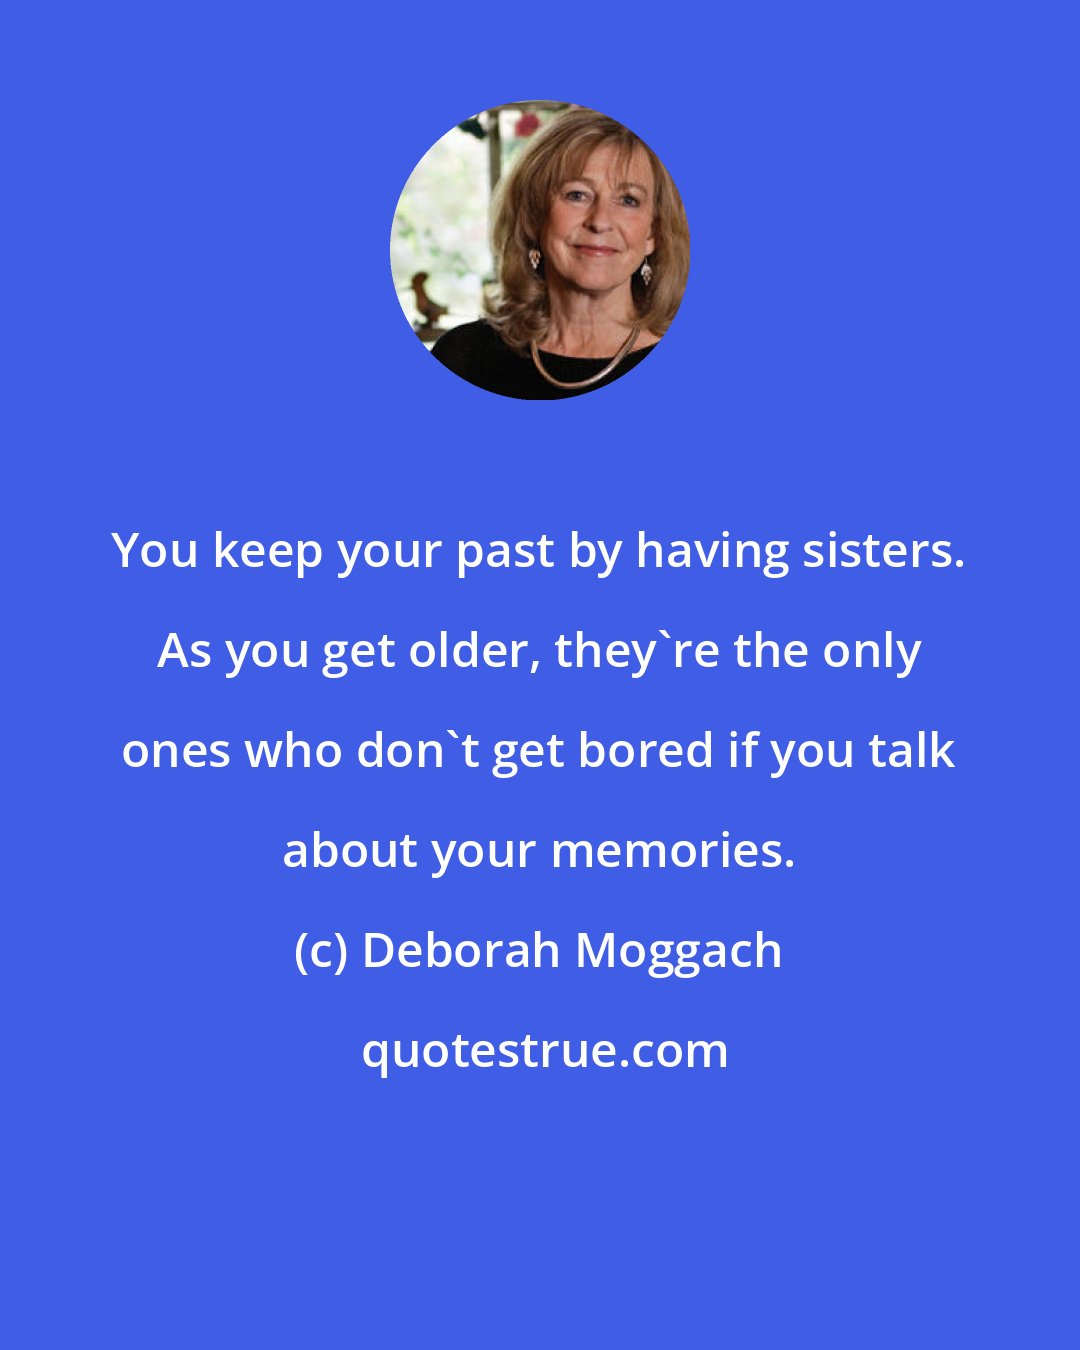 Deborah Moggach: You keep your past by having sisters. As you get older, they're the only ones who don't get bored if you talk about your memories.